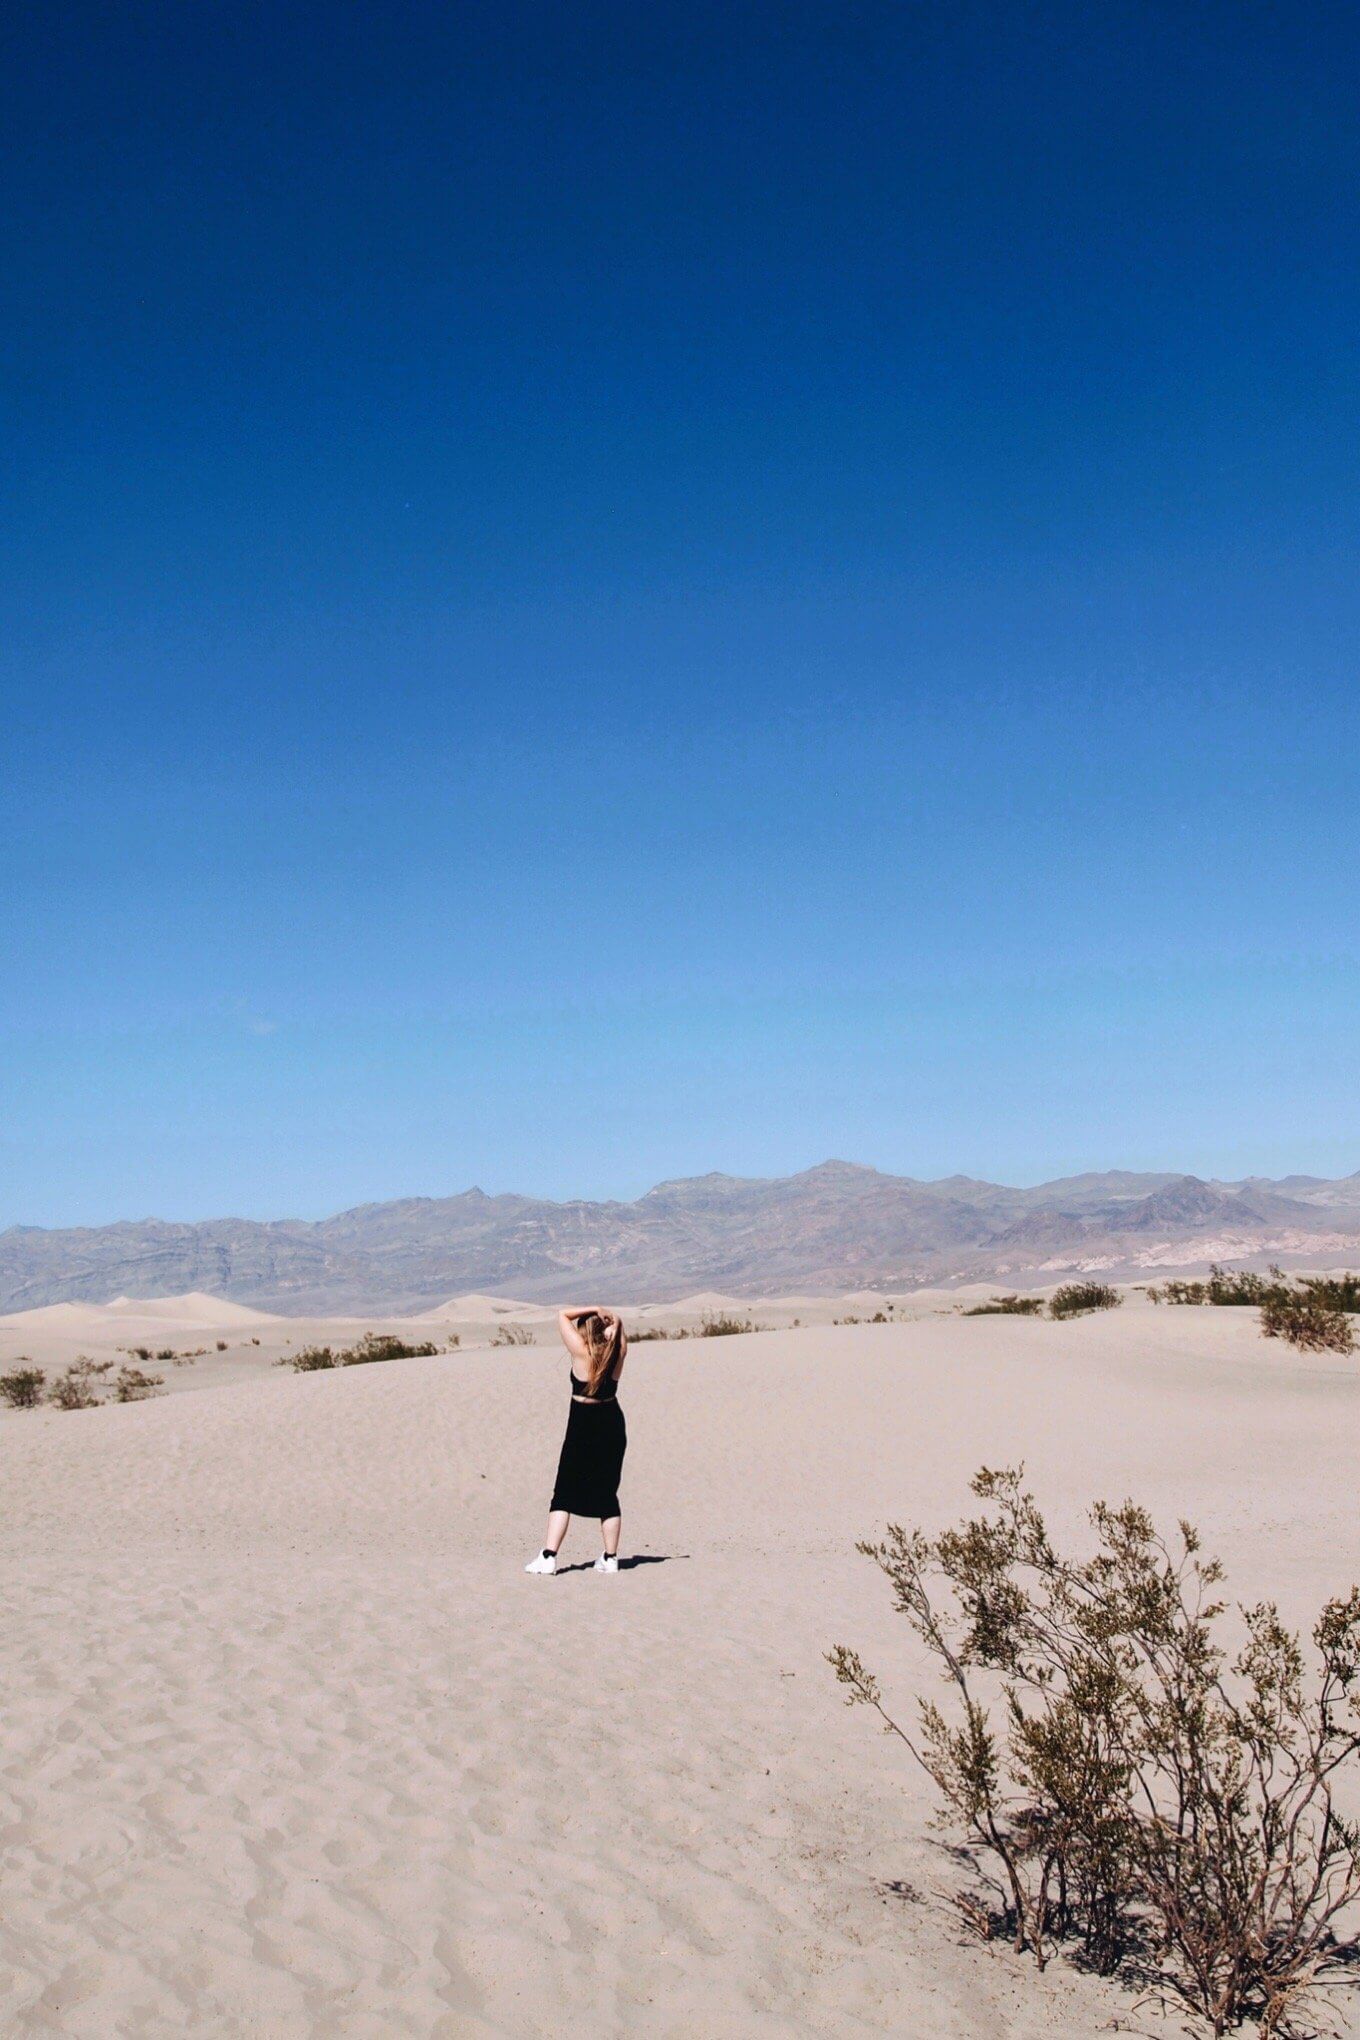 Ultimate California itinerary - Death Valley travel guide blog - things to do